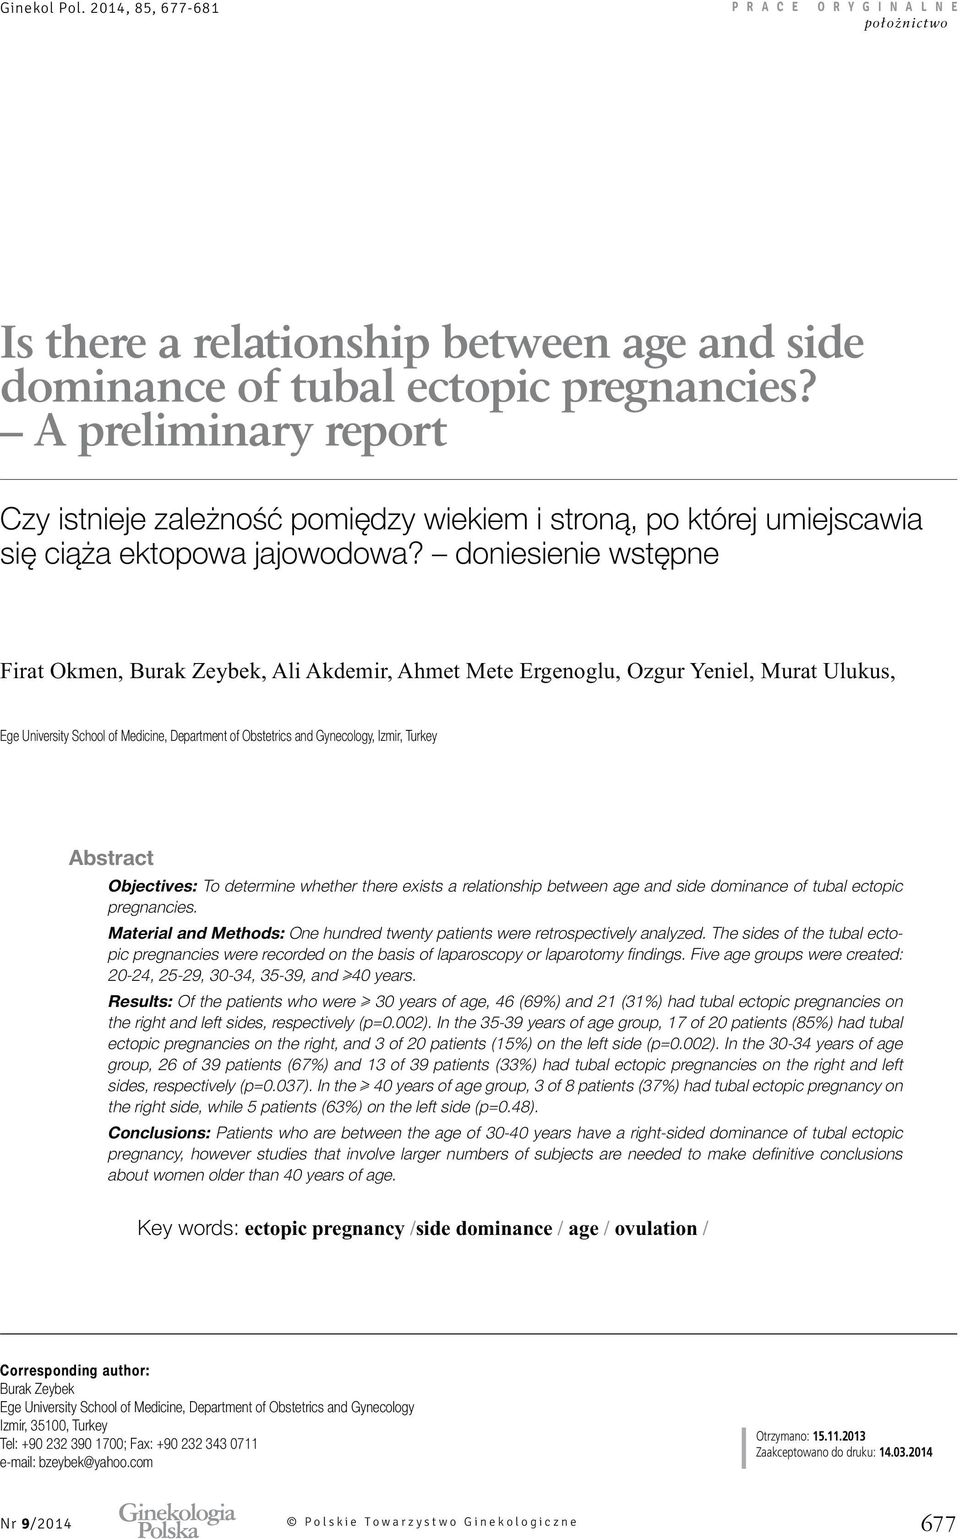 doniesienie wstępne Ege University School of Medicine, Department of Obstetrics and Gynecology, Izmir, Turkey Abstract Objectives: To determine whether there exists a relationship between age and